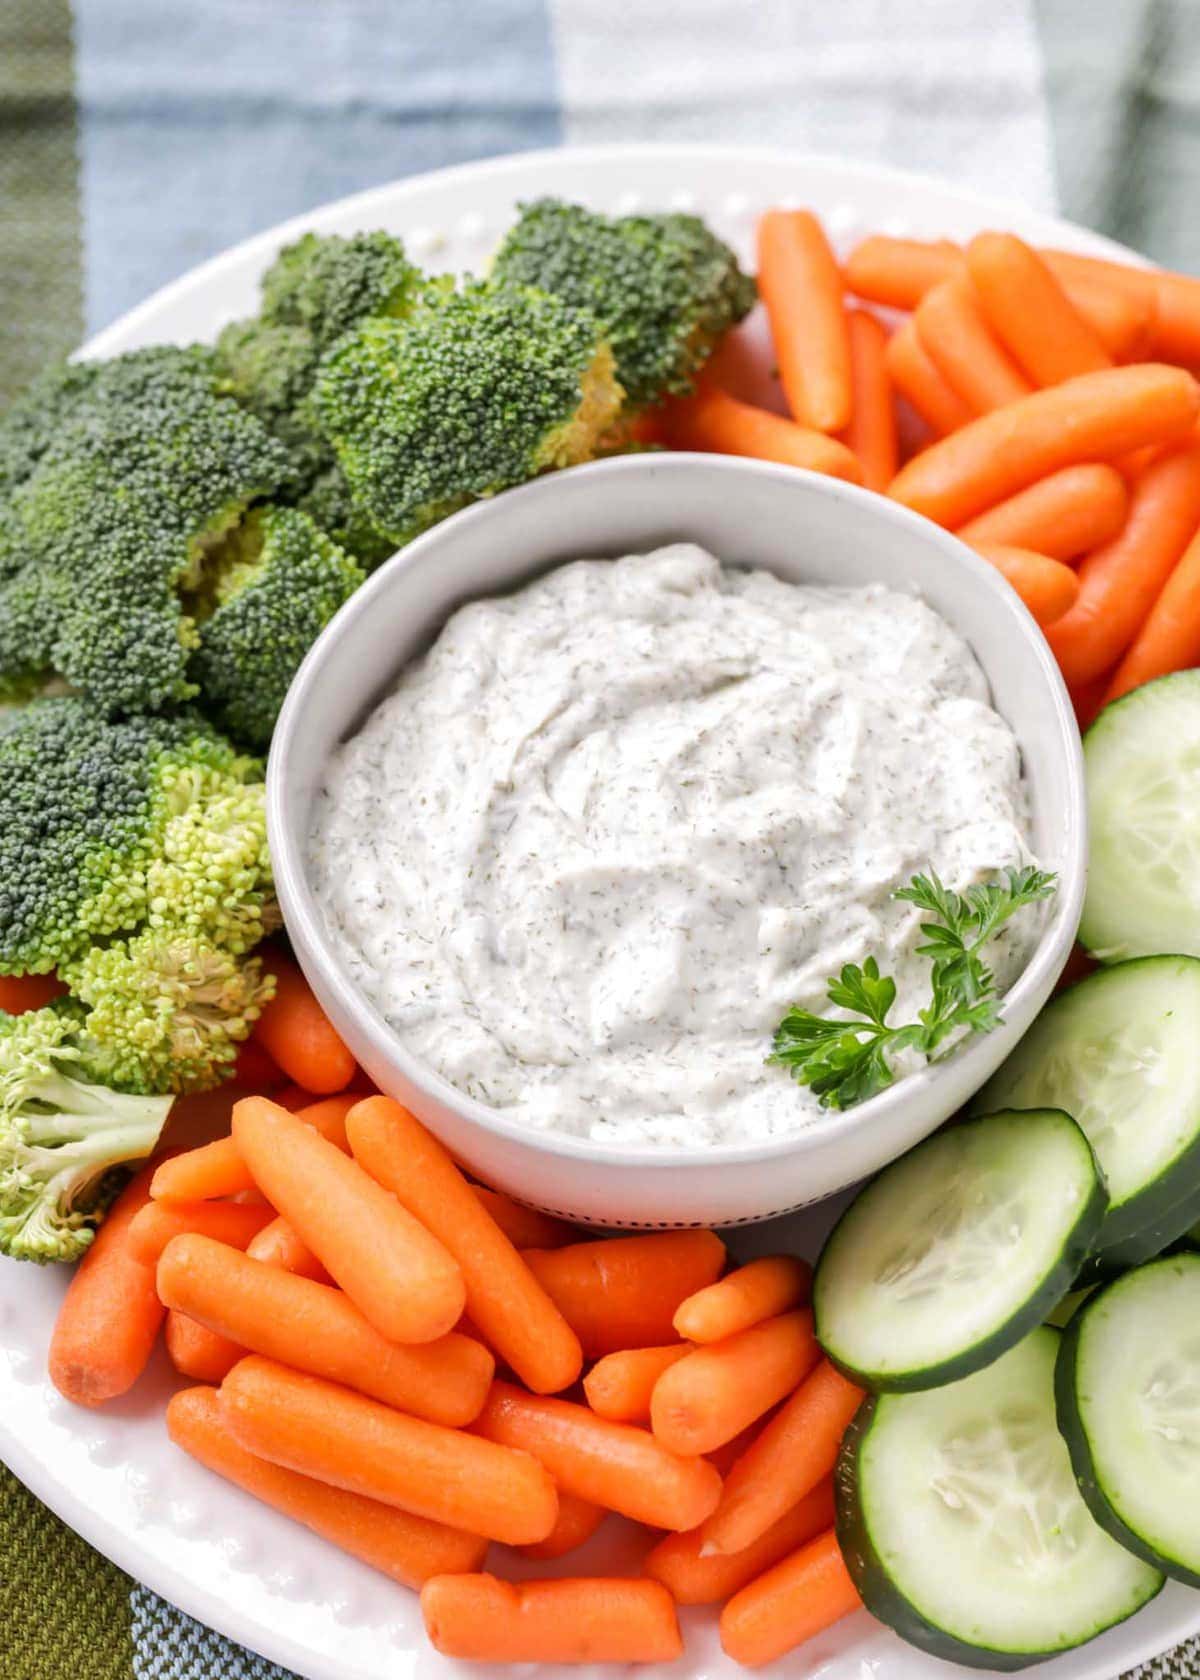 Dill Vegetable dip recipe in white bowl with veggies.